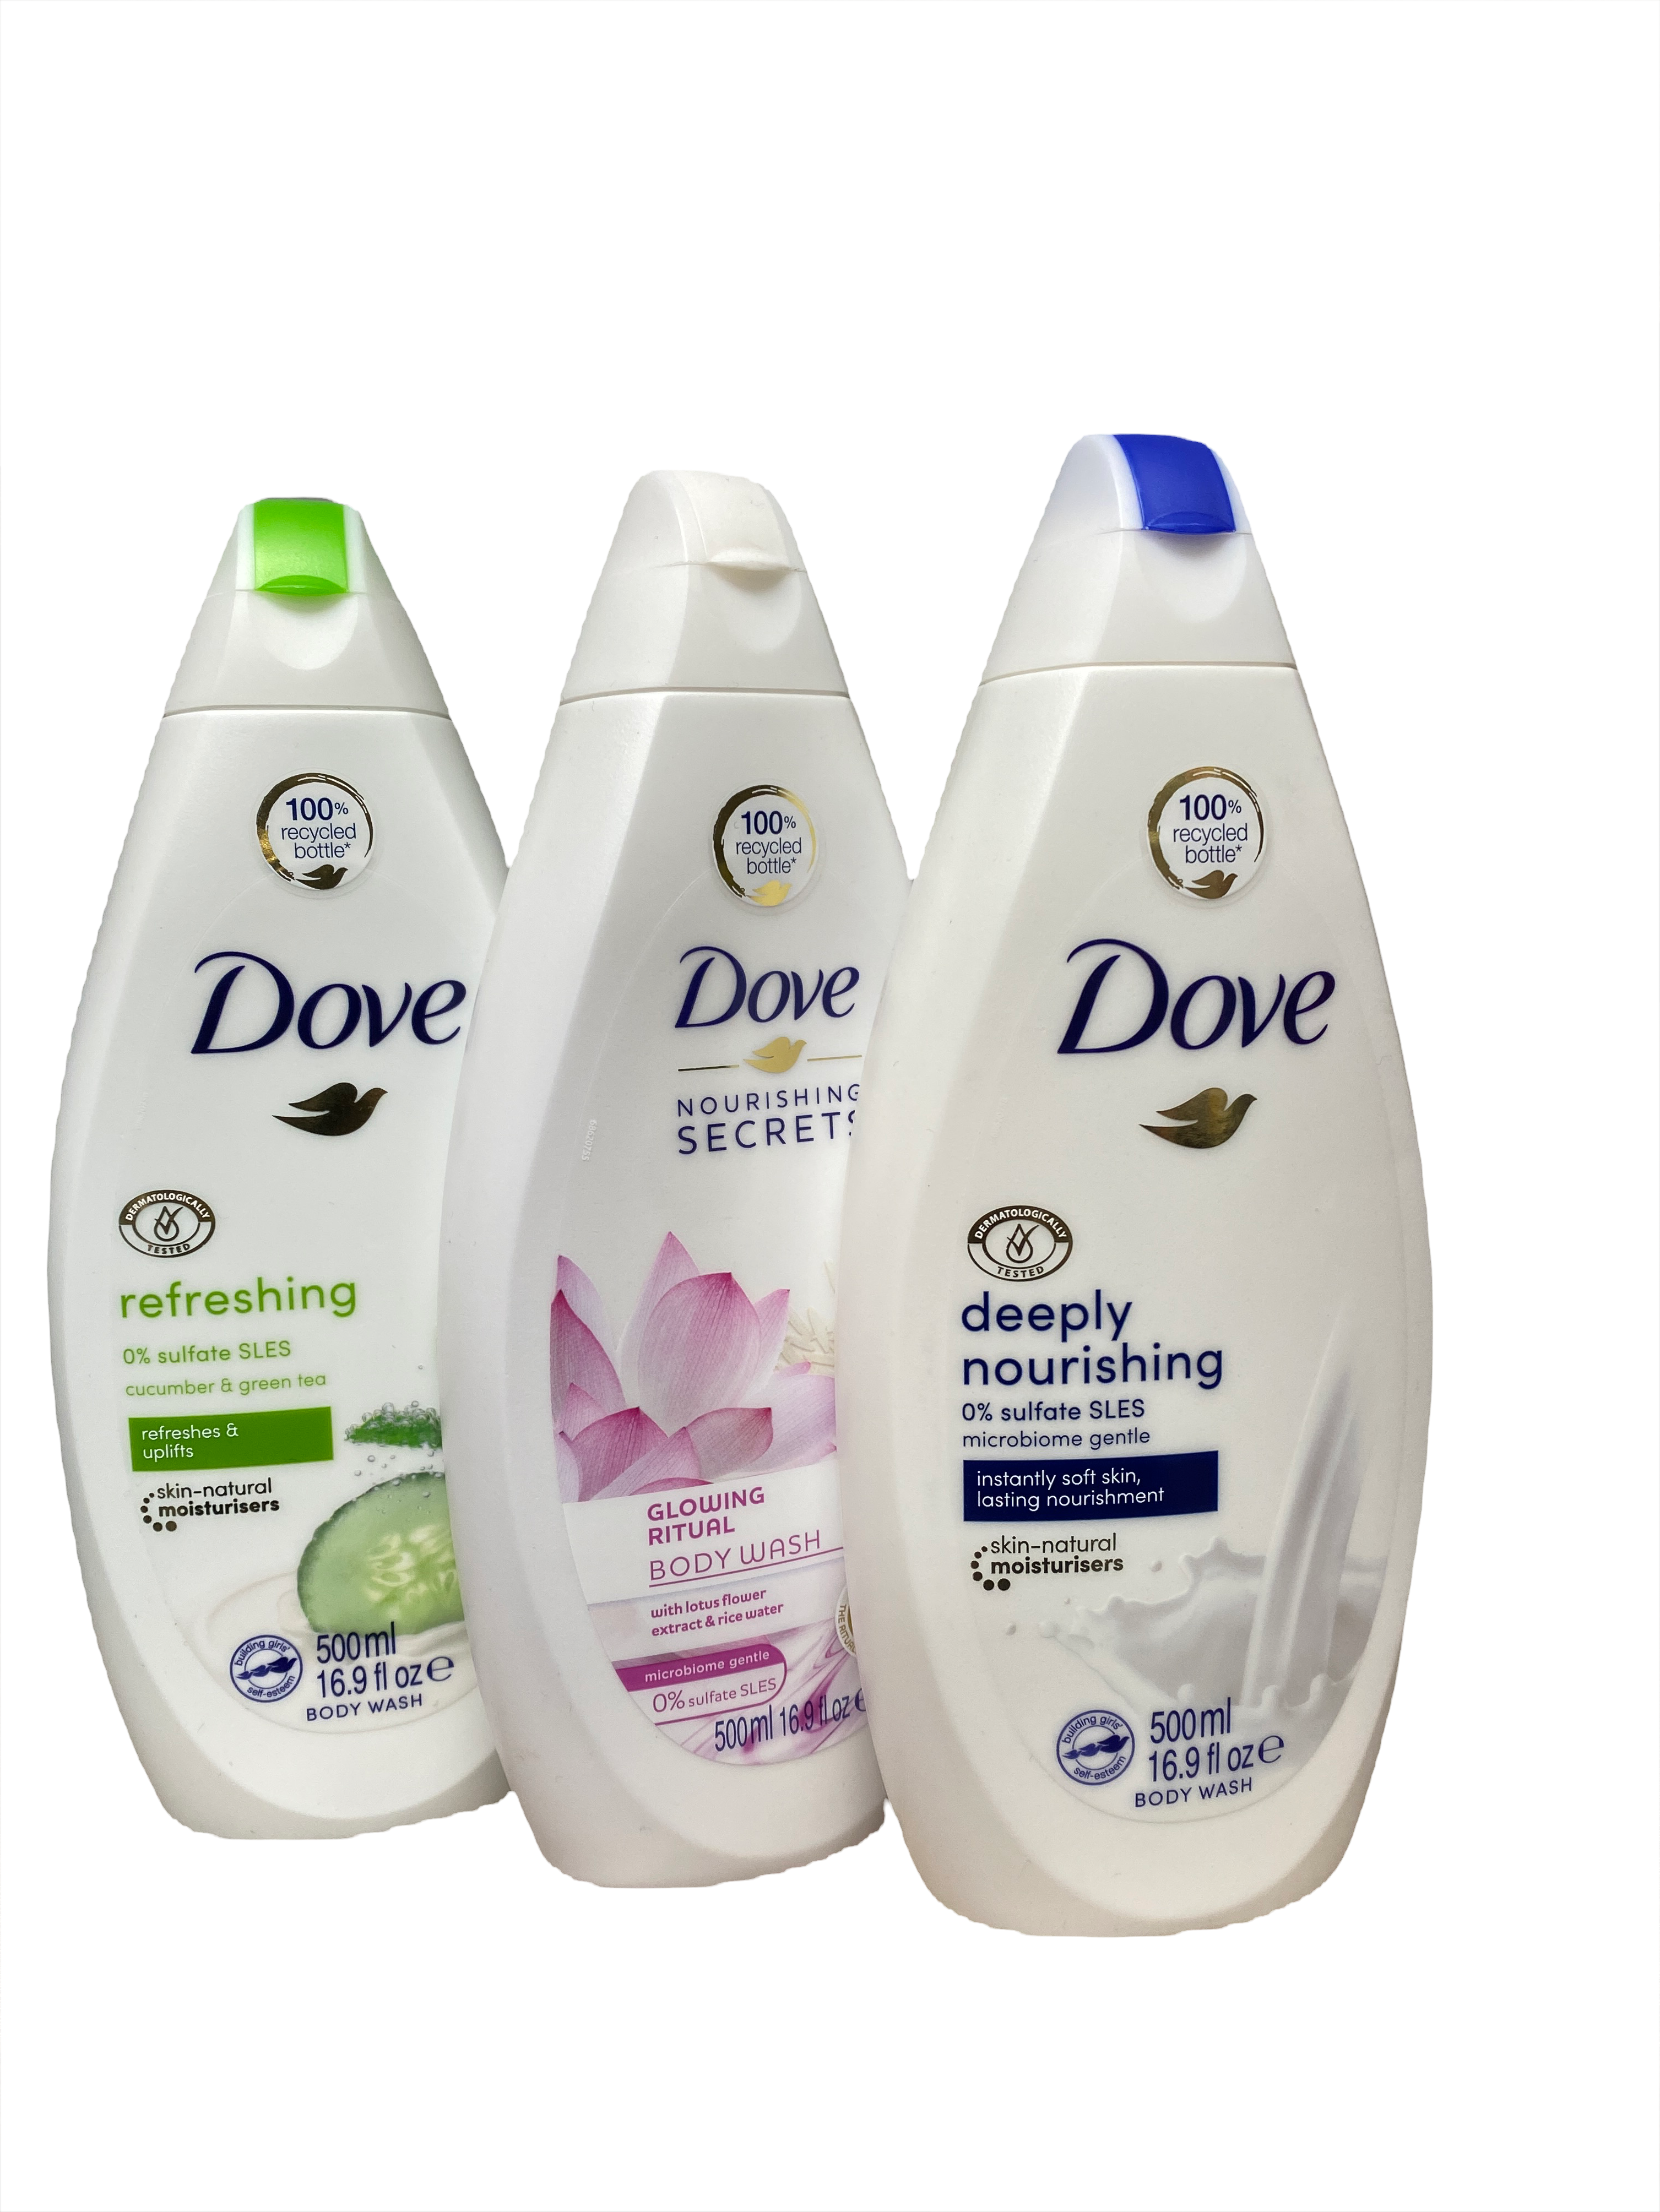 Dove 0% Sulfate Sles Wash – In Black Palace